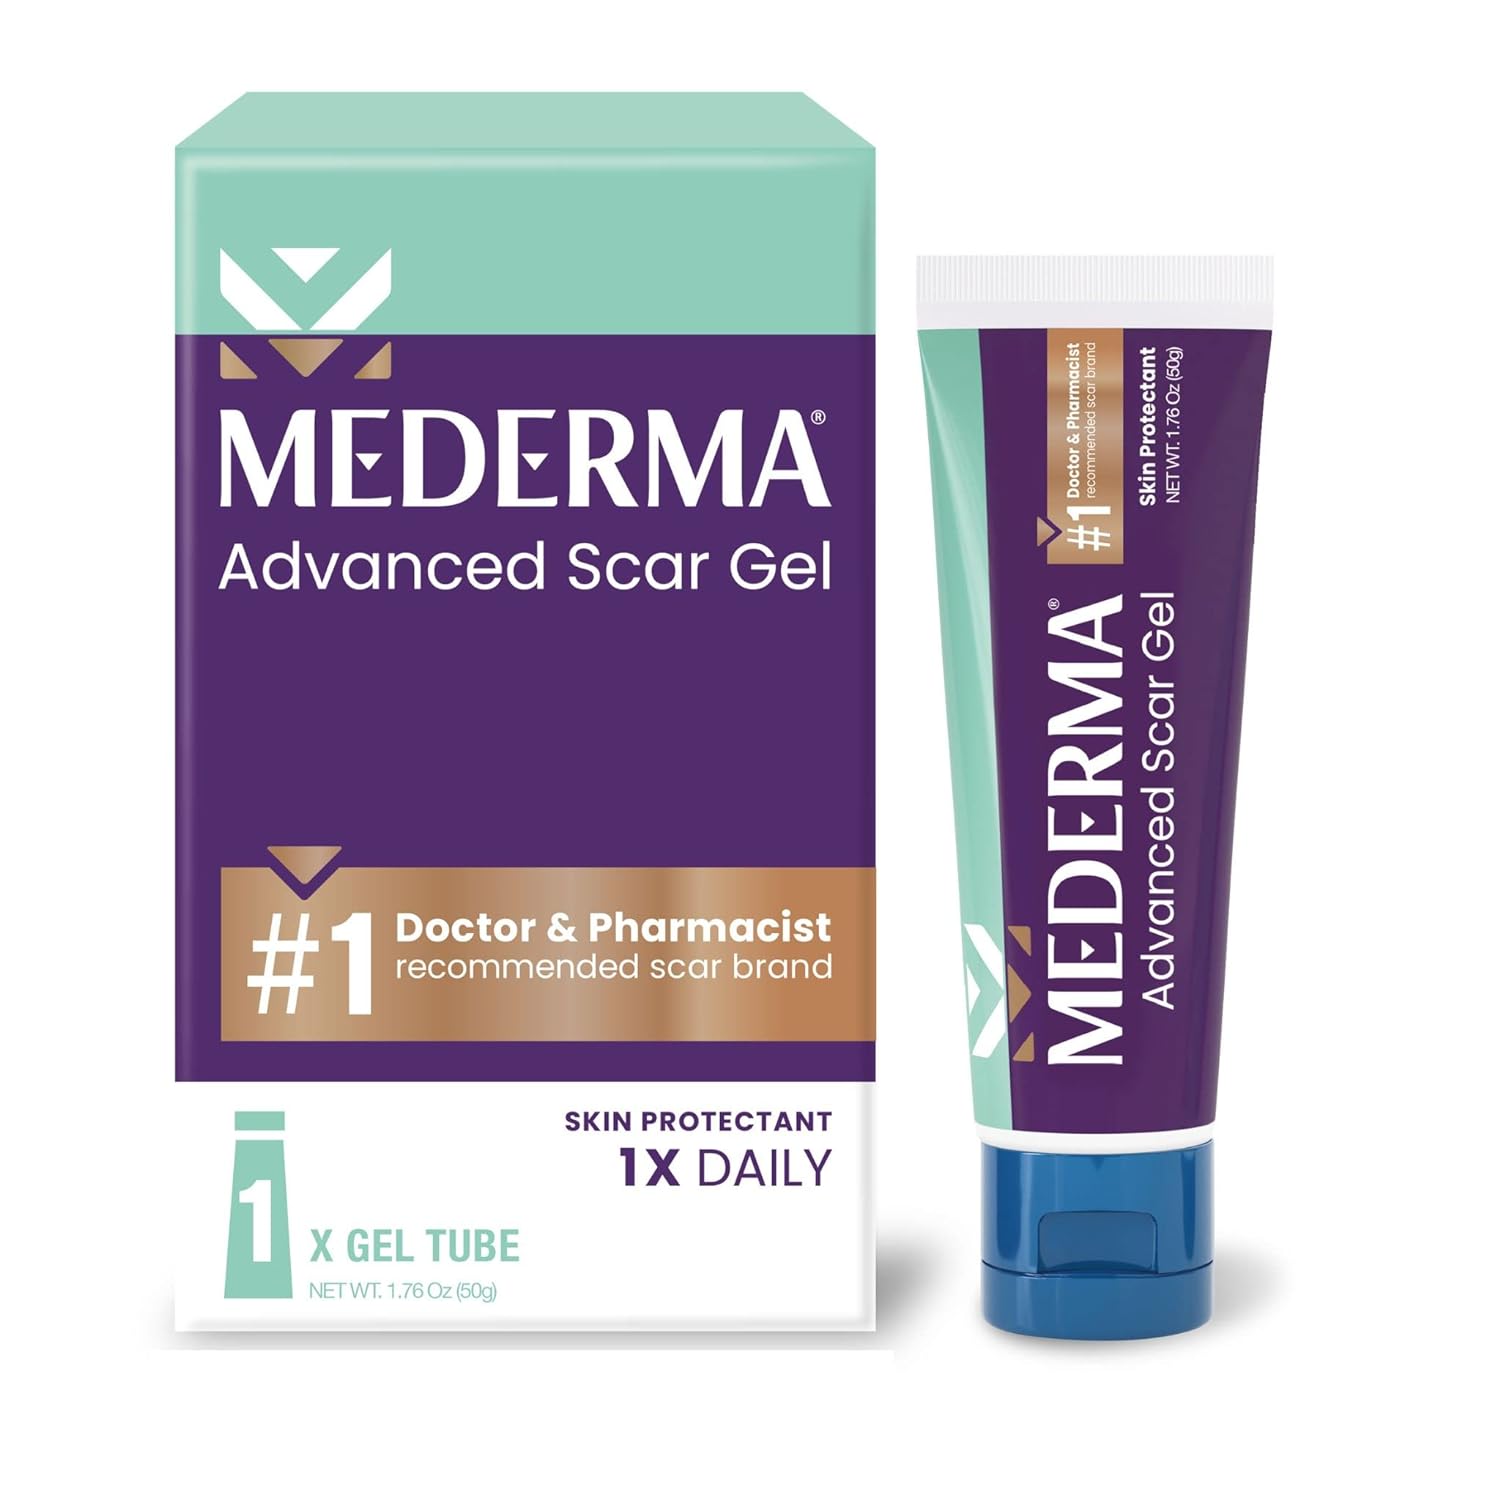 Mederma Advanced Scar Gel, Treats Old and New Scars, Reduces the Appearance of Scars from Acne, Stitches, Burns and More, 50 Grams